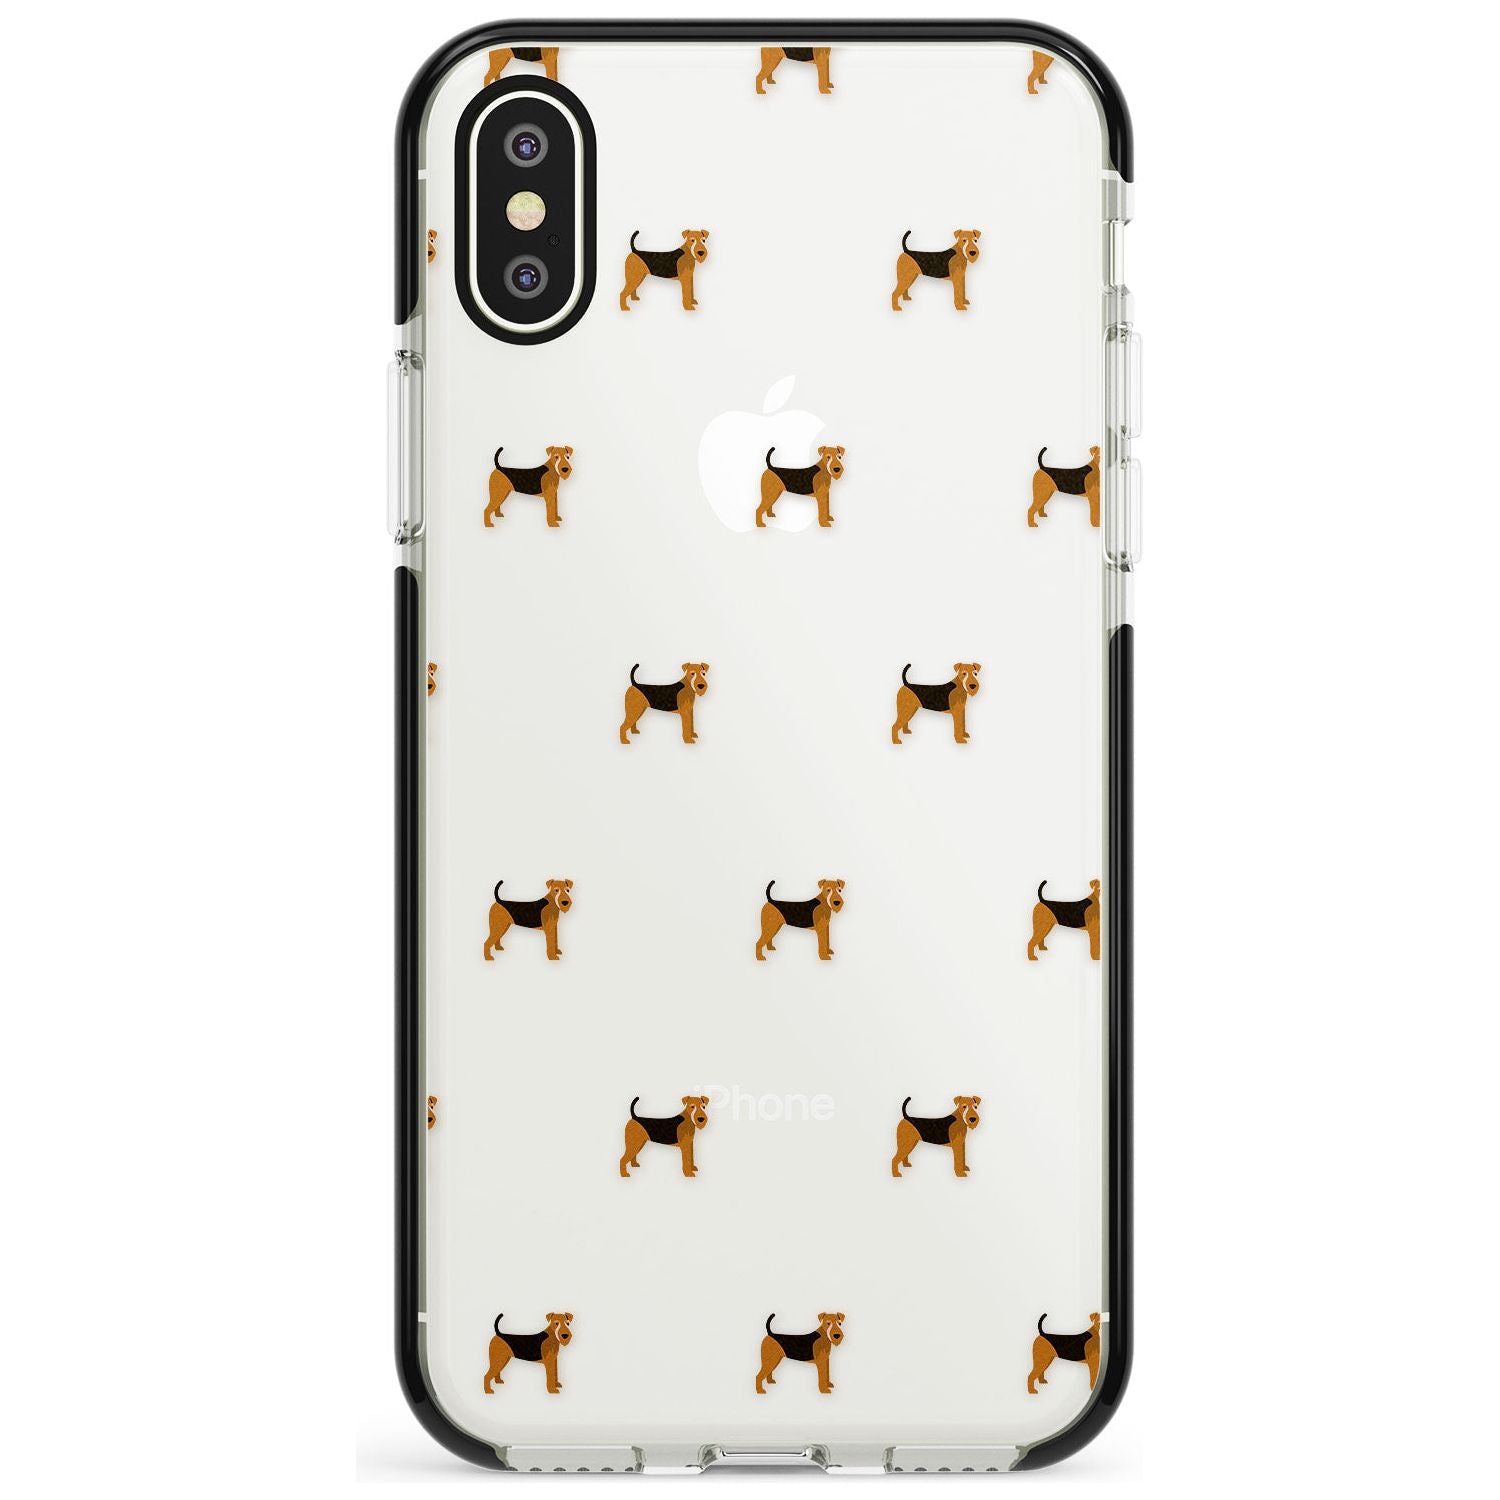 Airedale Terrier Dog Pattern Clear Black Impact Phone Case for iPhone X XS Max XR